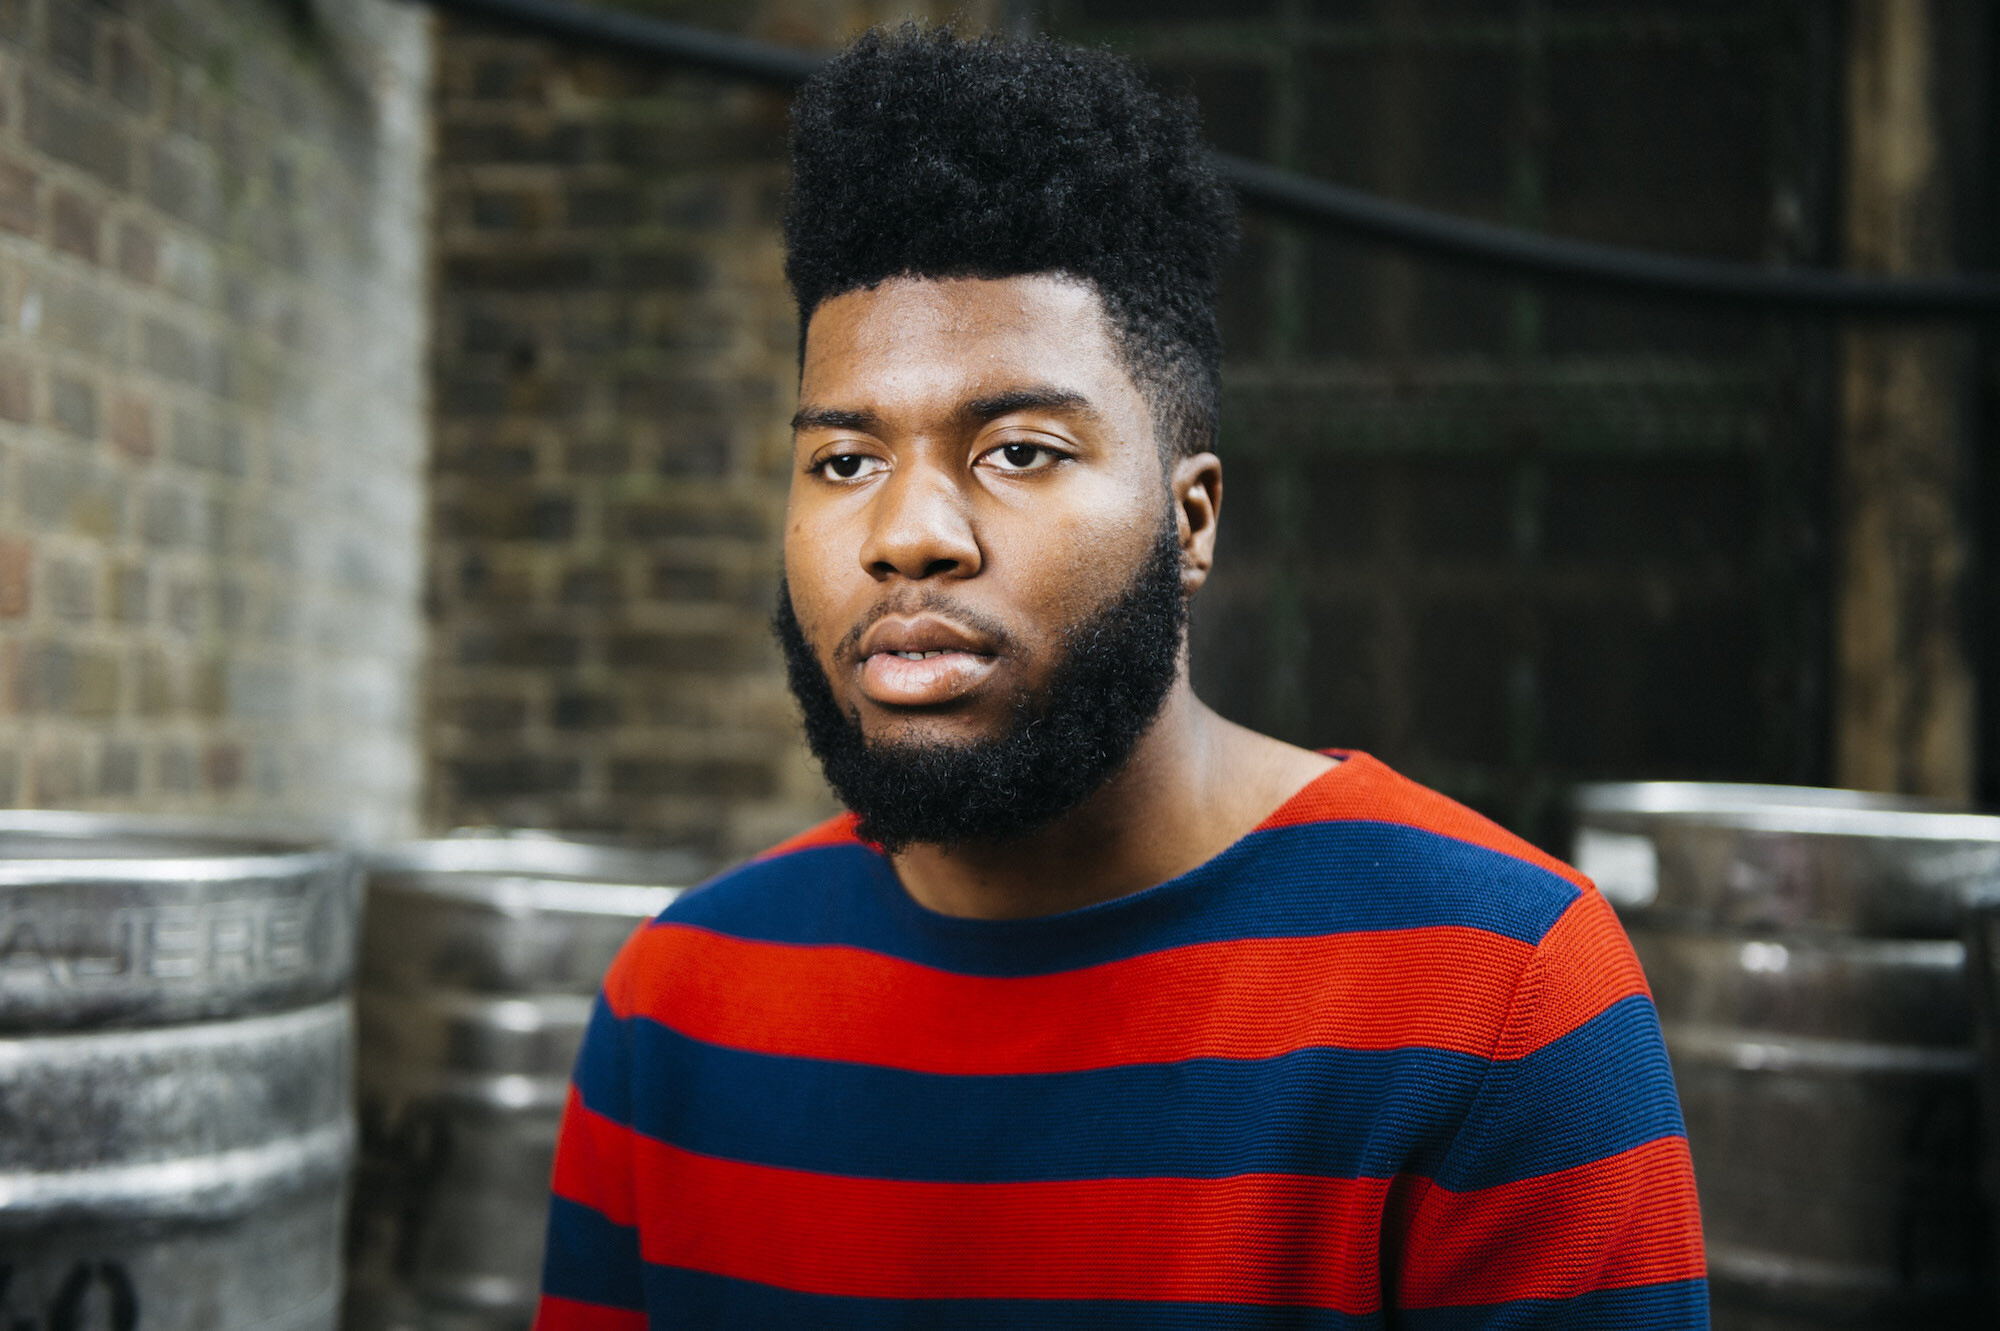 Khalid (Singer): Known for No. 1 pop songs "Love Lies" with Normani and "Eastside" with Benny Blanco and Halsey. 2000x1340 HD Background.